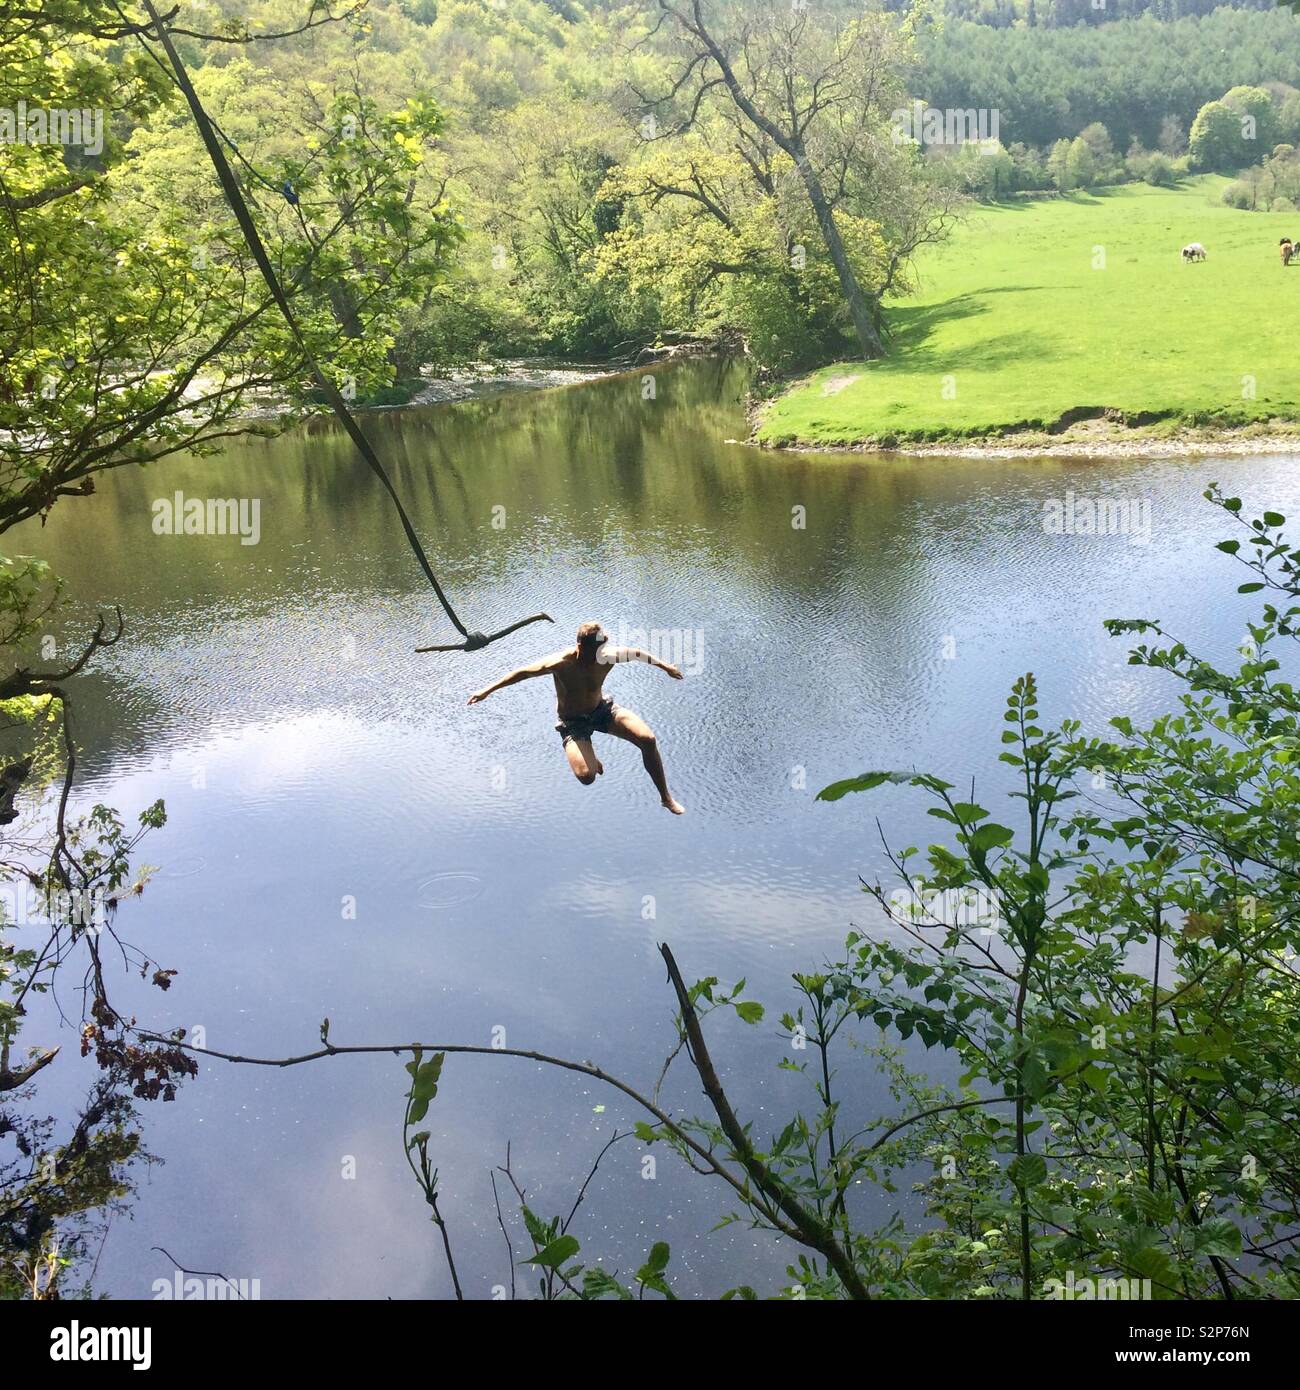 Leap of faith: Single figure leaving swing to drop into river on a sunny day Stock Photo